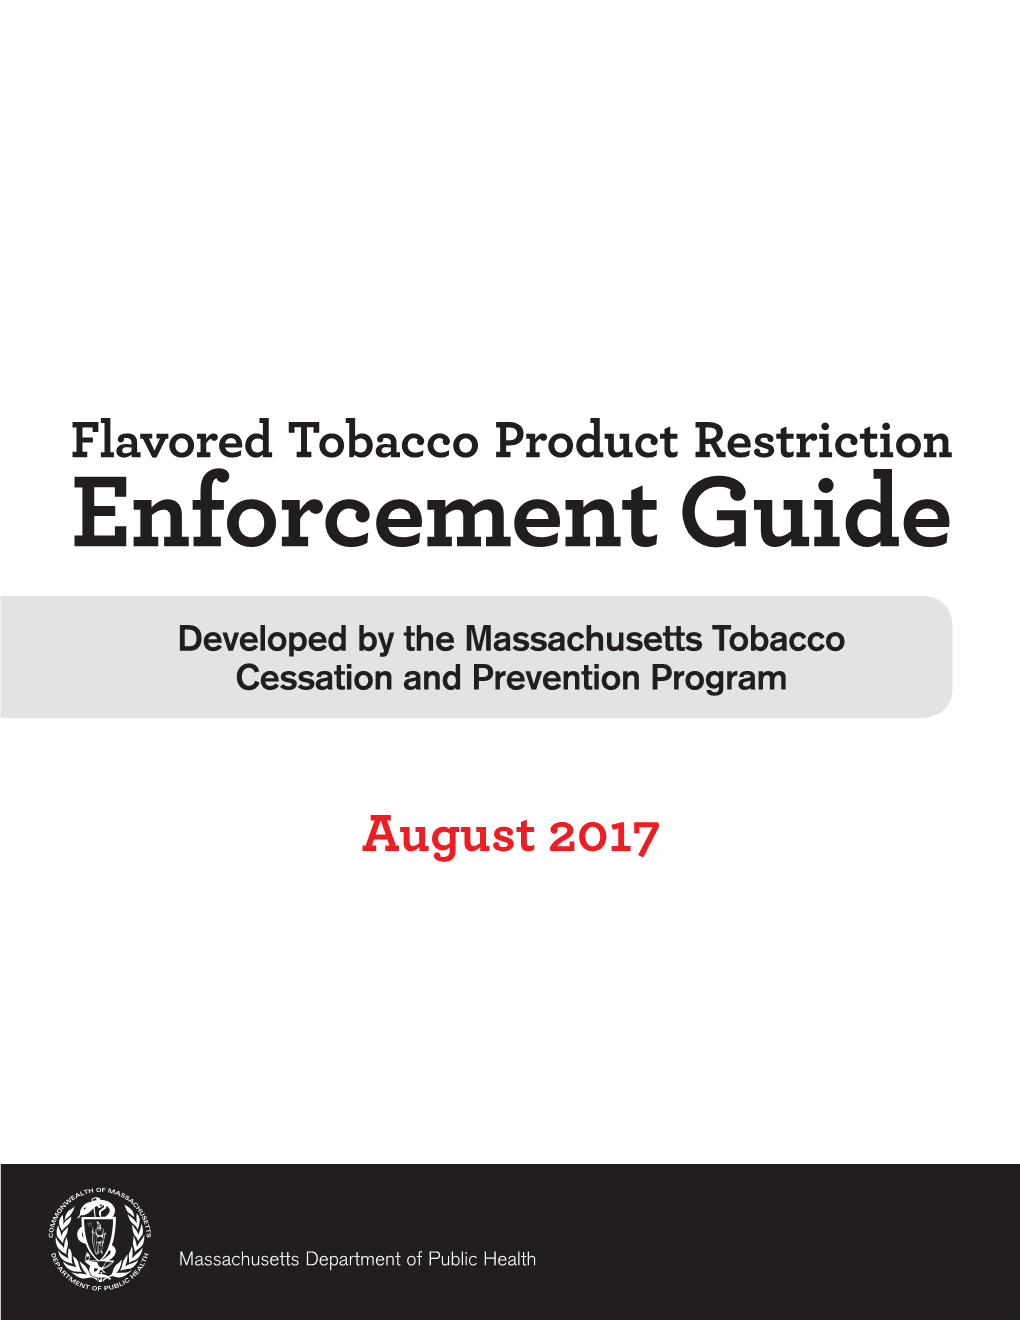 Flavored Tobacco Product Restriction Enforcement Guide